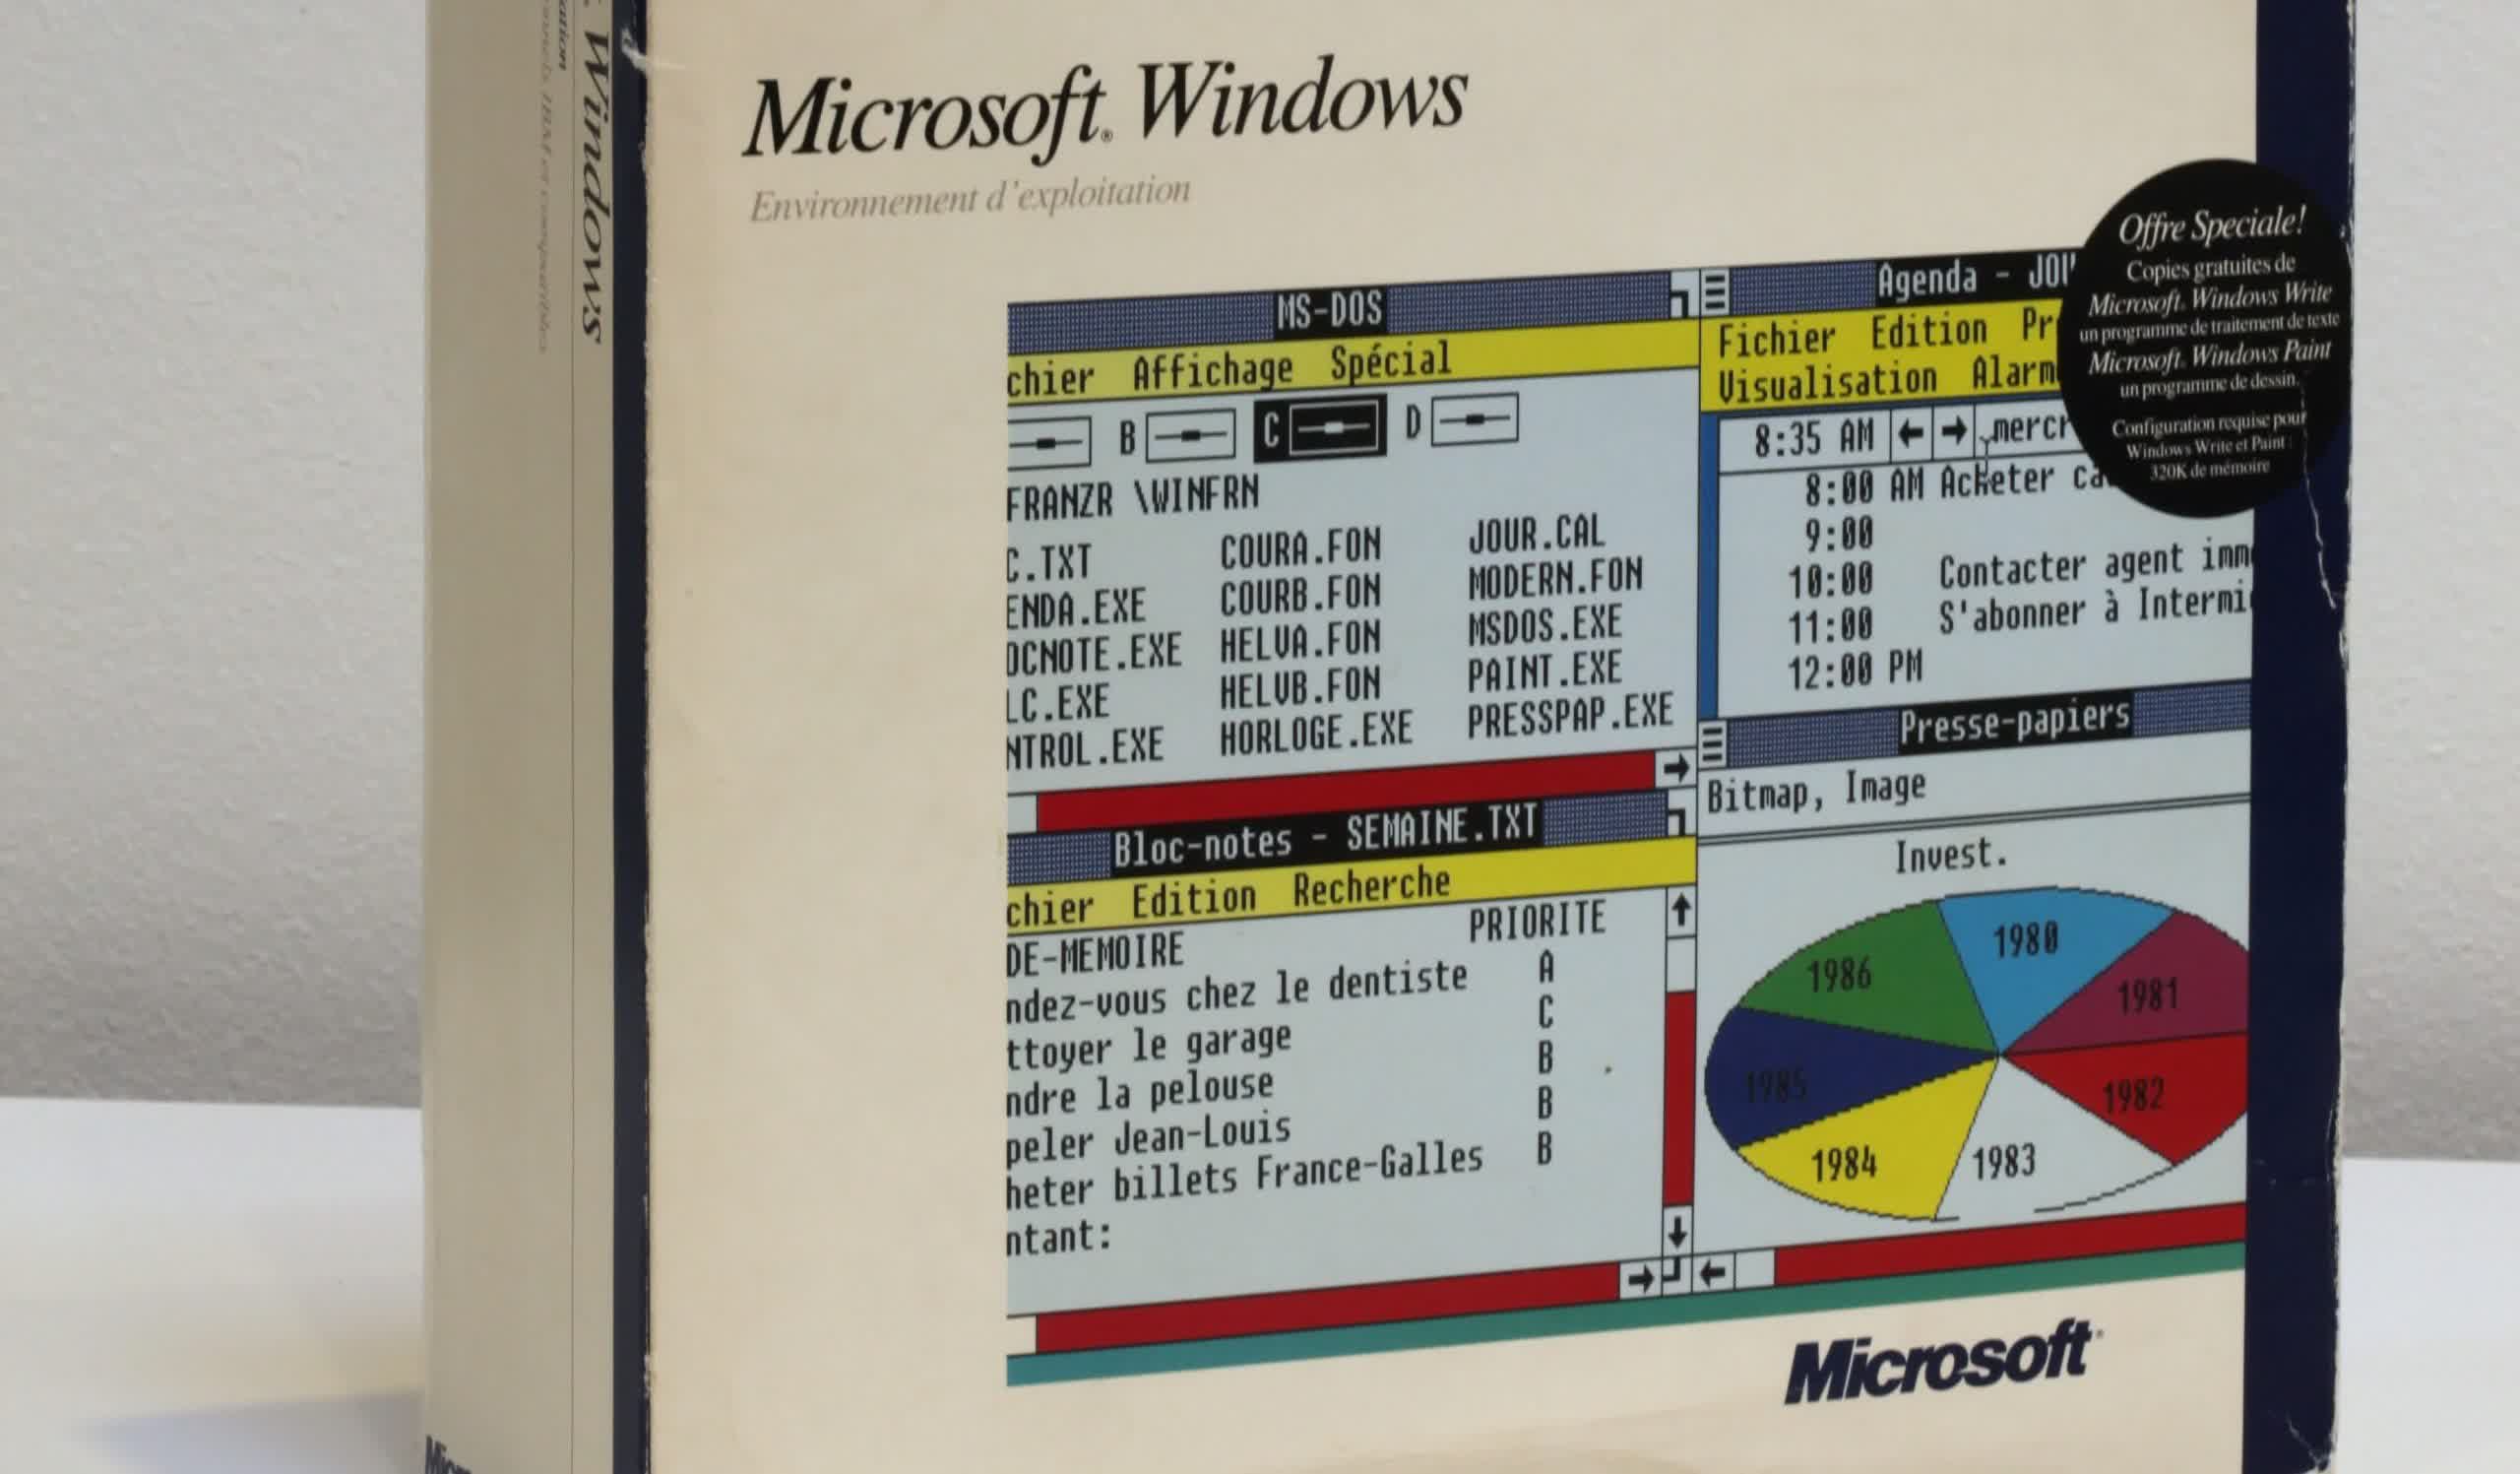 It took 37 years to find this Easter egg in Windows 1.0